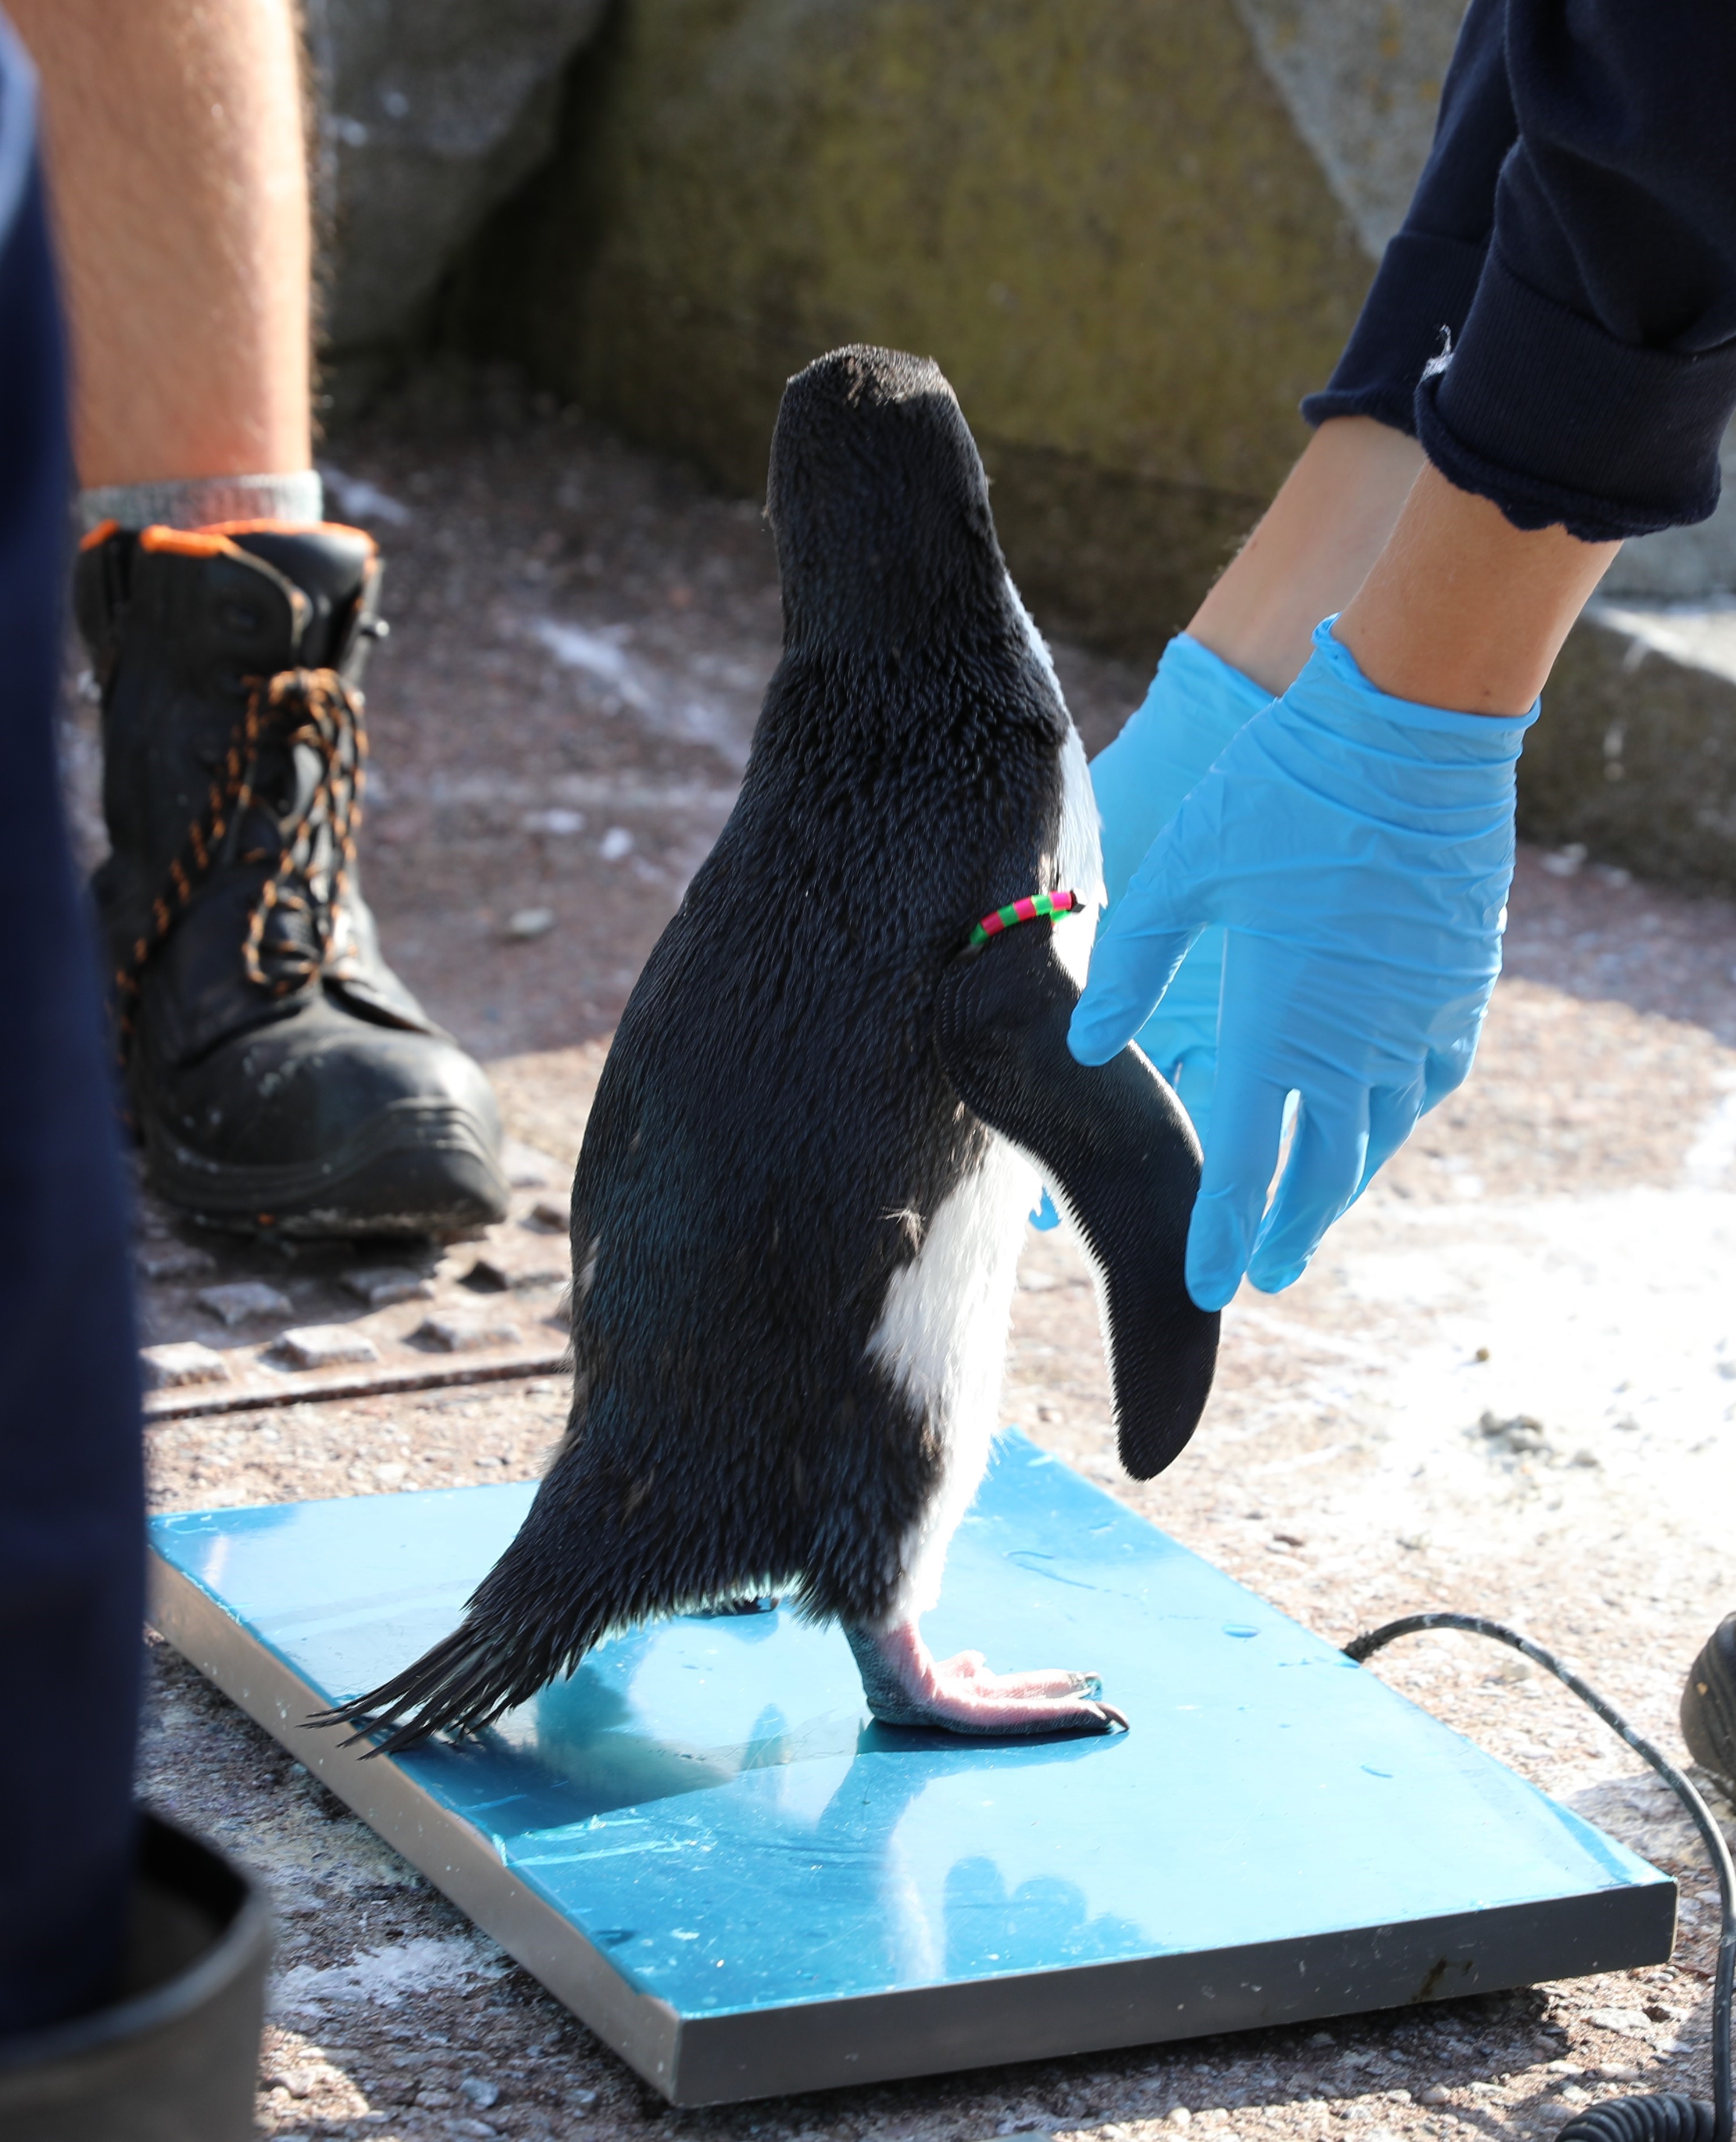 penguin stood on scales